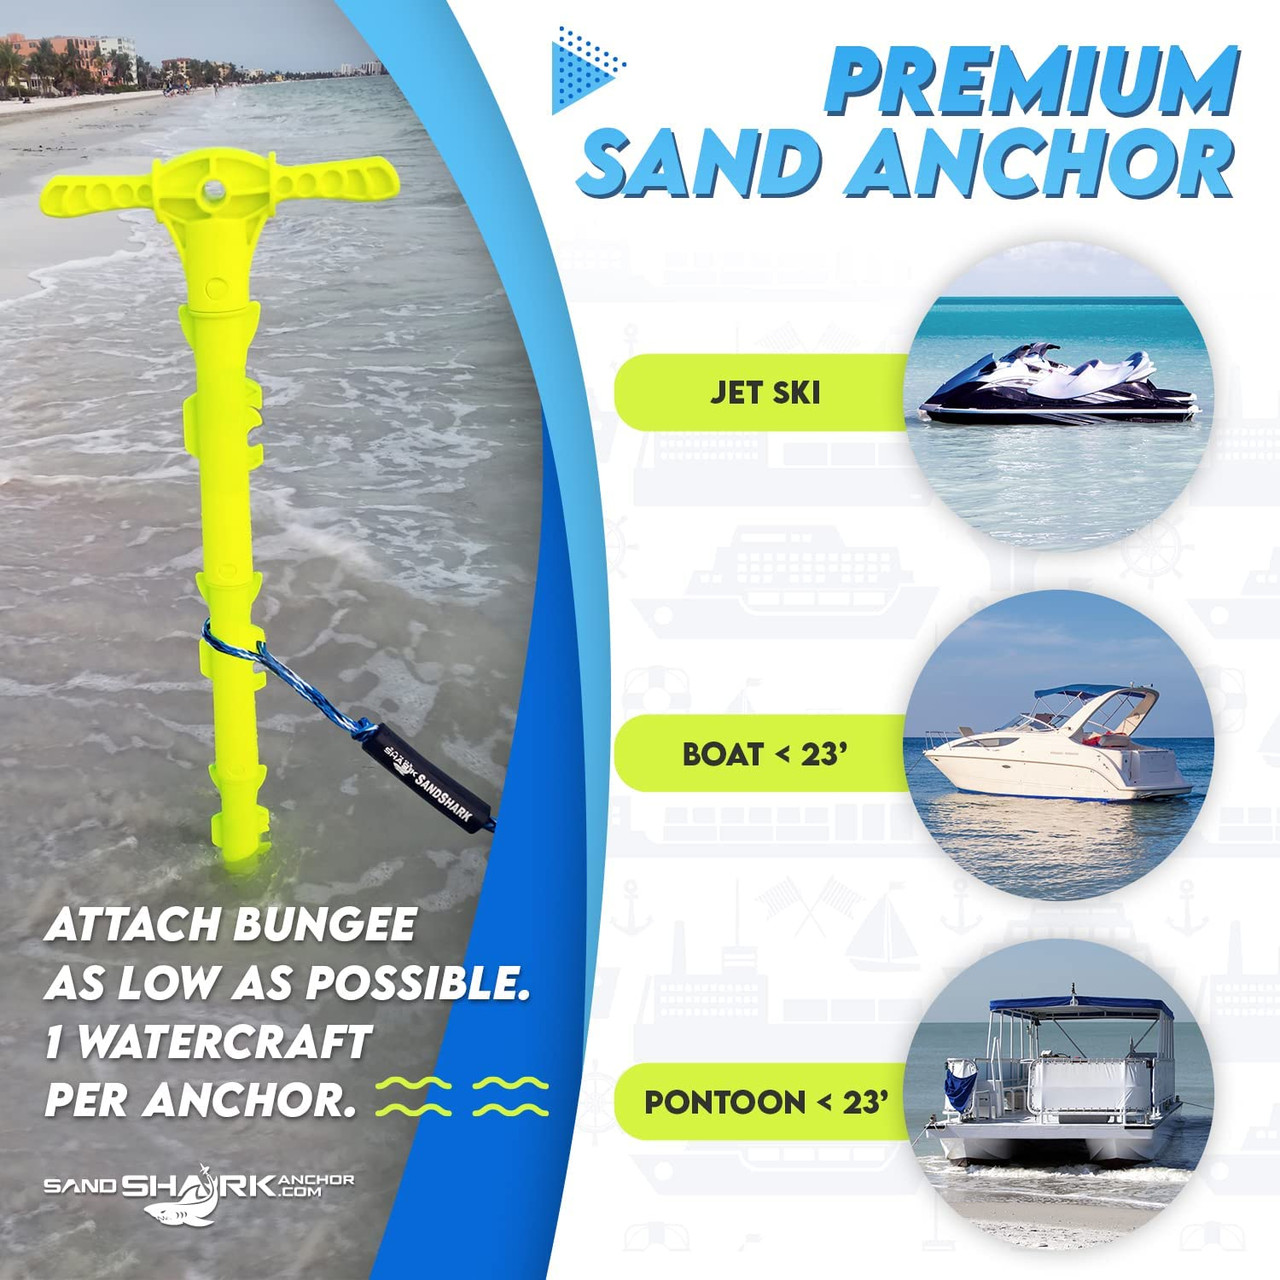 New Sport Sand Shallow Water Beach Anchor by SandShark. Boats, Pontoons,  PWC, Kayak. Patent Pending Design. Snaps Together, Easy Storage, Easy to  Use. 4' Tall.